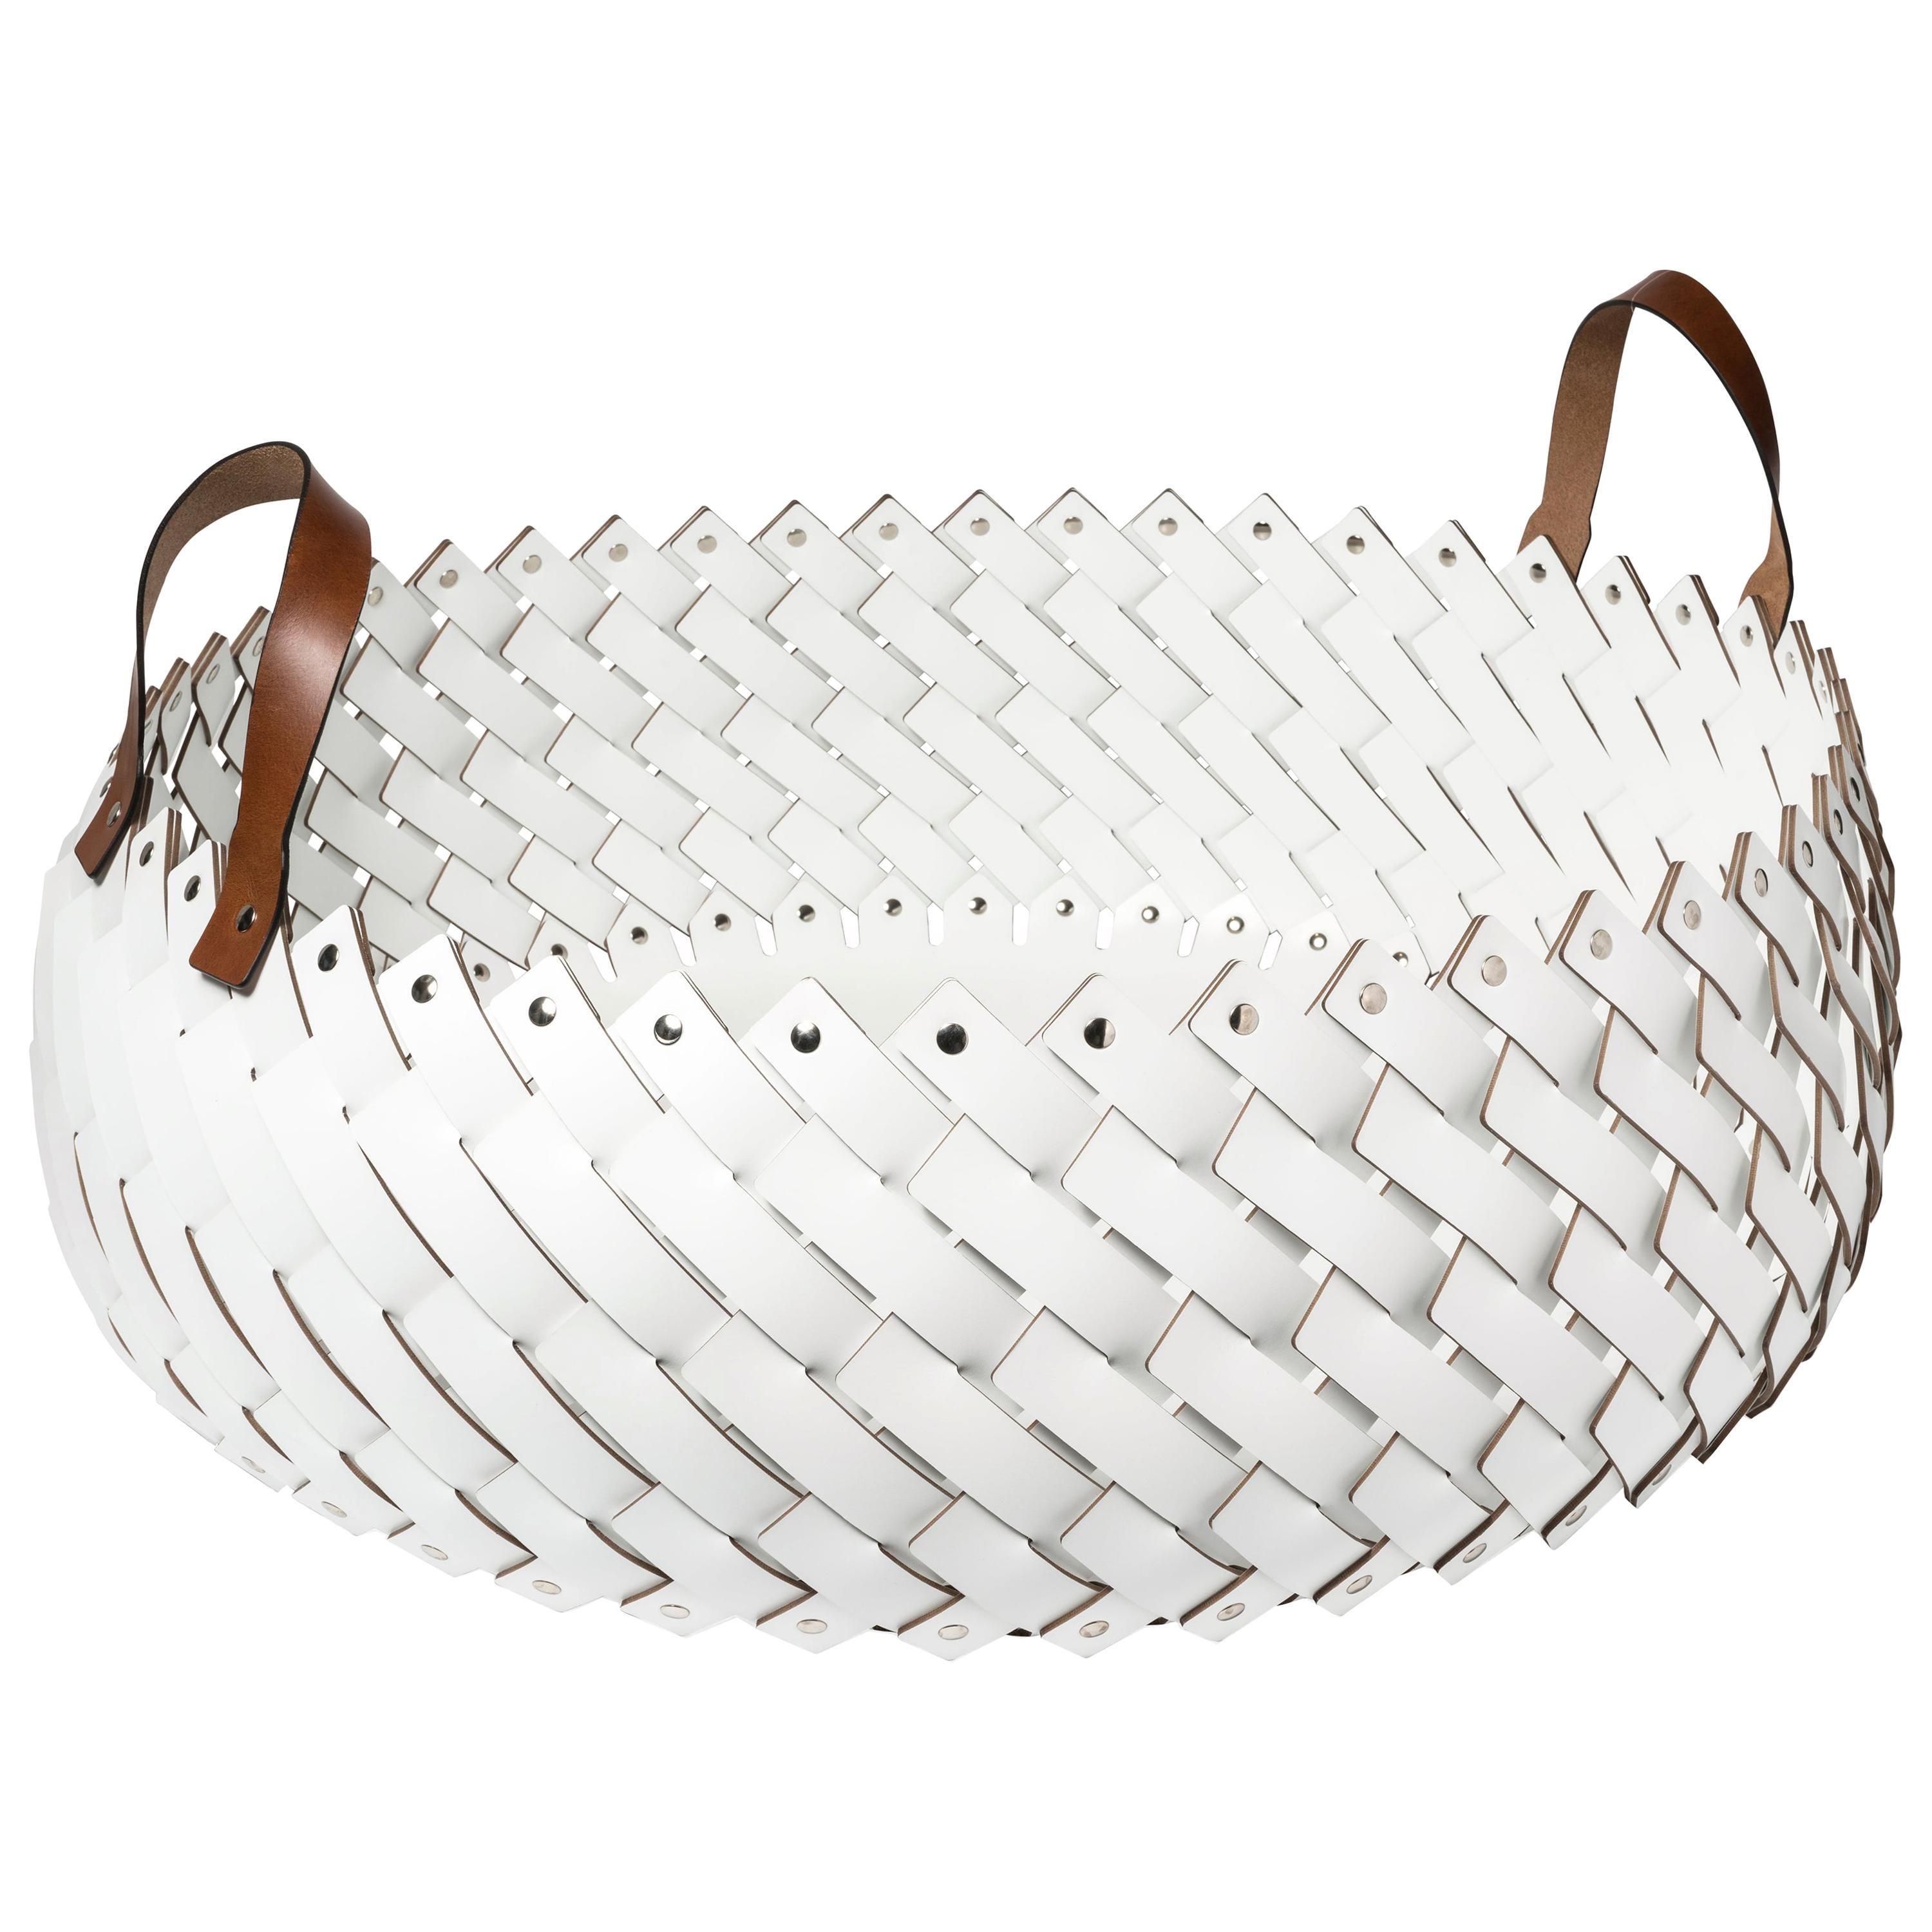 Contemporary White Woven Leather Almeria Basket with Handles